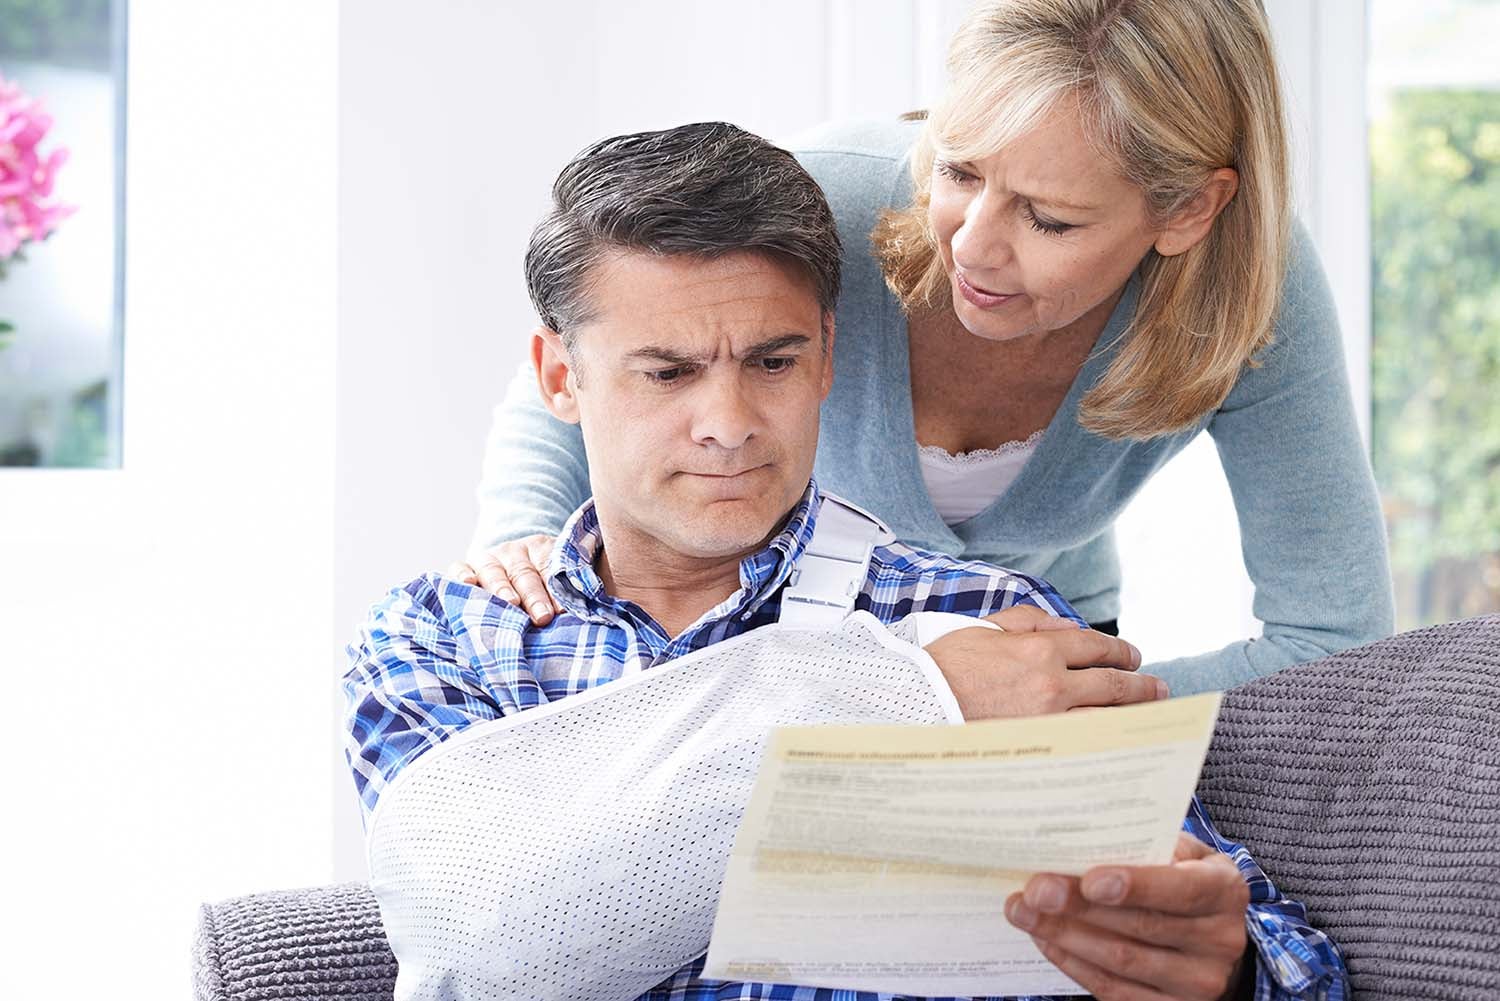 Attorney Car Accident Arm Injury Settlements